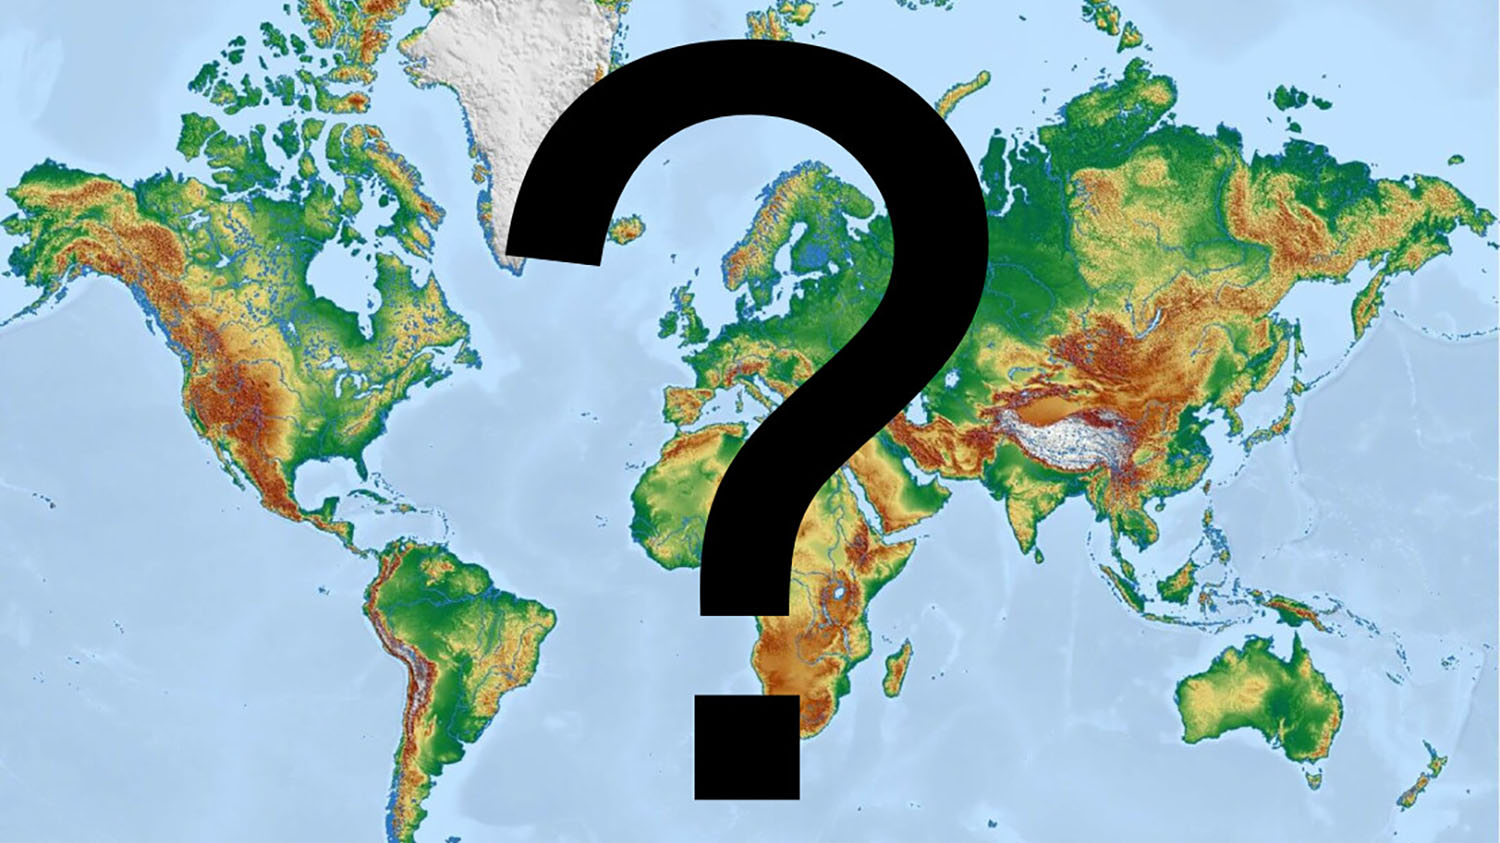 A world map with a large question mark over it.